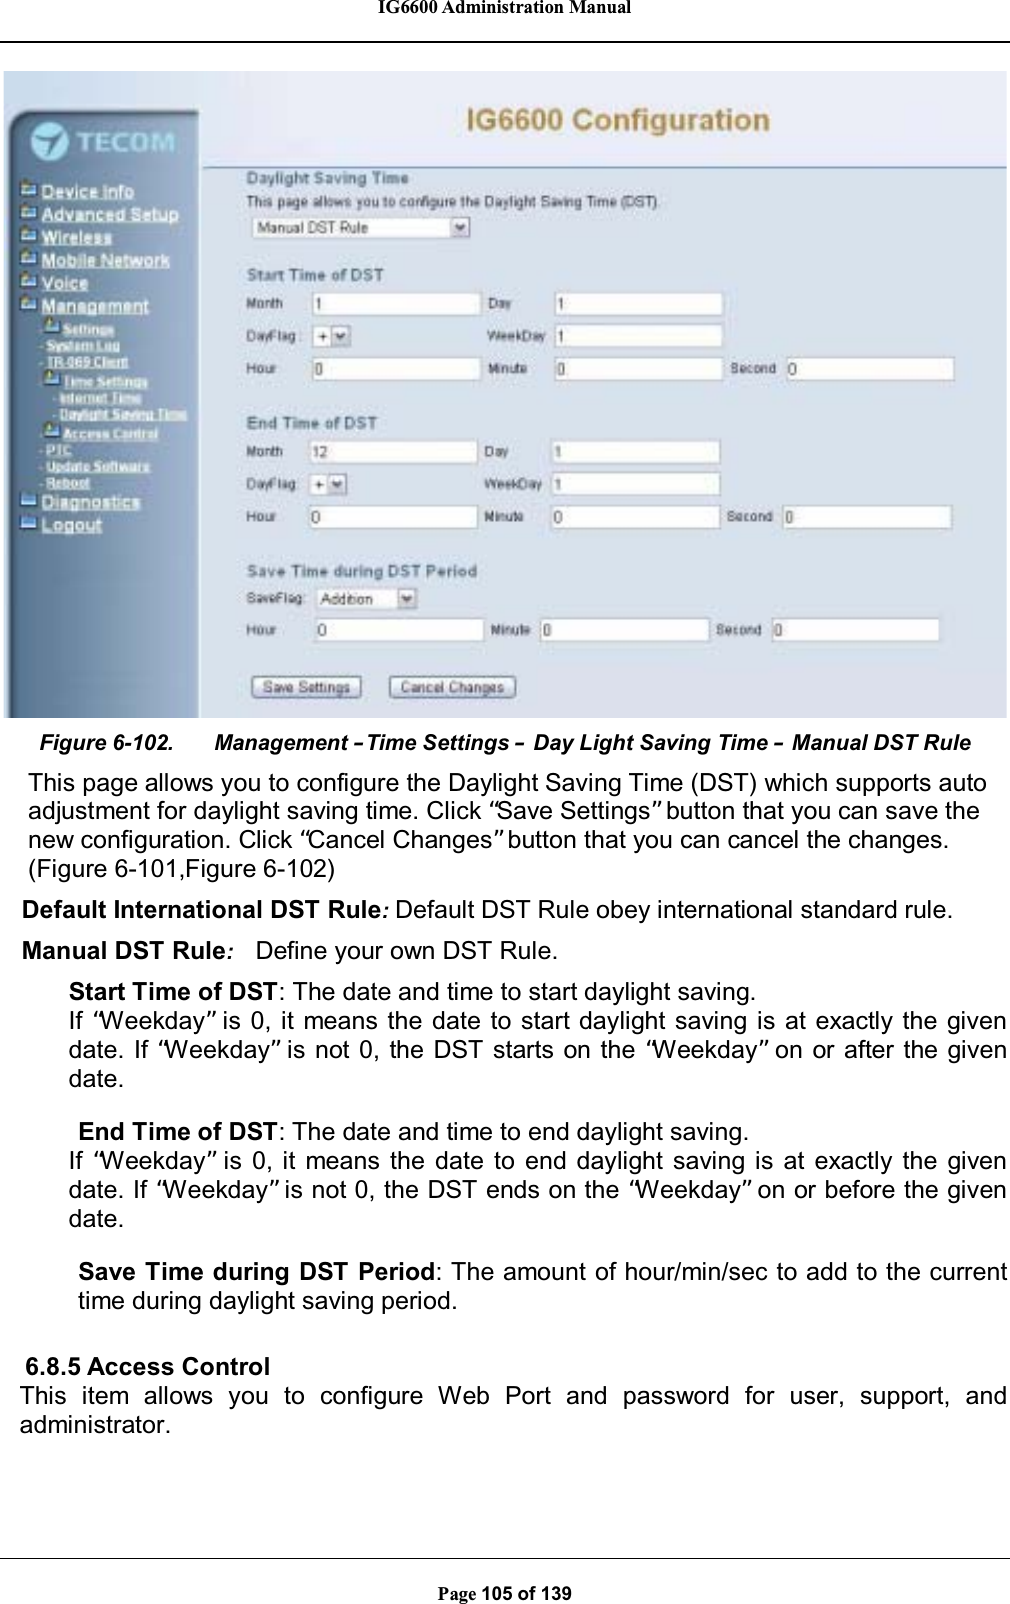 IG6600 Administration ManualPage 105 of 139Figure 6-102. Management –Time Settings –Day Light Saving Time –Manual DST RuleThis page allows you to configure the Daylight Saving Time (DST) which supports autoadjustment for daylight saving time. Click “Save Settings”button that you can save thenew configuration. Click “Cancel Changes”button that you can cancel the changes.(Figure 6-101,Figure 6-102)Default International DST Rule:Default DST Rule obey international standard rule.Manual DST Rule:Define your own DST Rule.Start Time of DST: The date and time to start daylight saving.If “Weekday”is 0, it means the date to start daylight saving is at exactly the givendate. If “Weekday”is not 0, the DST starts on the “Weekday”on or after the givendate.End Time of DST: The date and time to end daylight saving.If “Weekday”is 0, it means the date to end daylight saving is at exactly the givendate. If “Weekday”is not 0, the DST ends on the “Weekday”on or before the givendate.Save Time during DST Period: The amount of hour/min/sec to add to the currenttime during daylight saving period.6.8.5 Access ControlThis item allows you to configure Web Port and password for user, support, andadministrator.